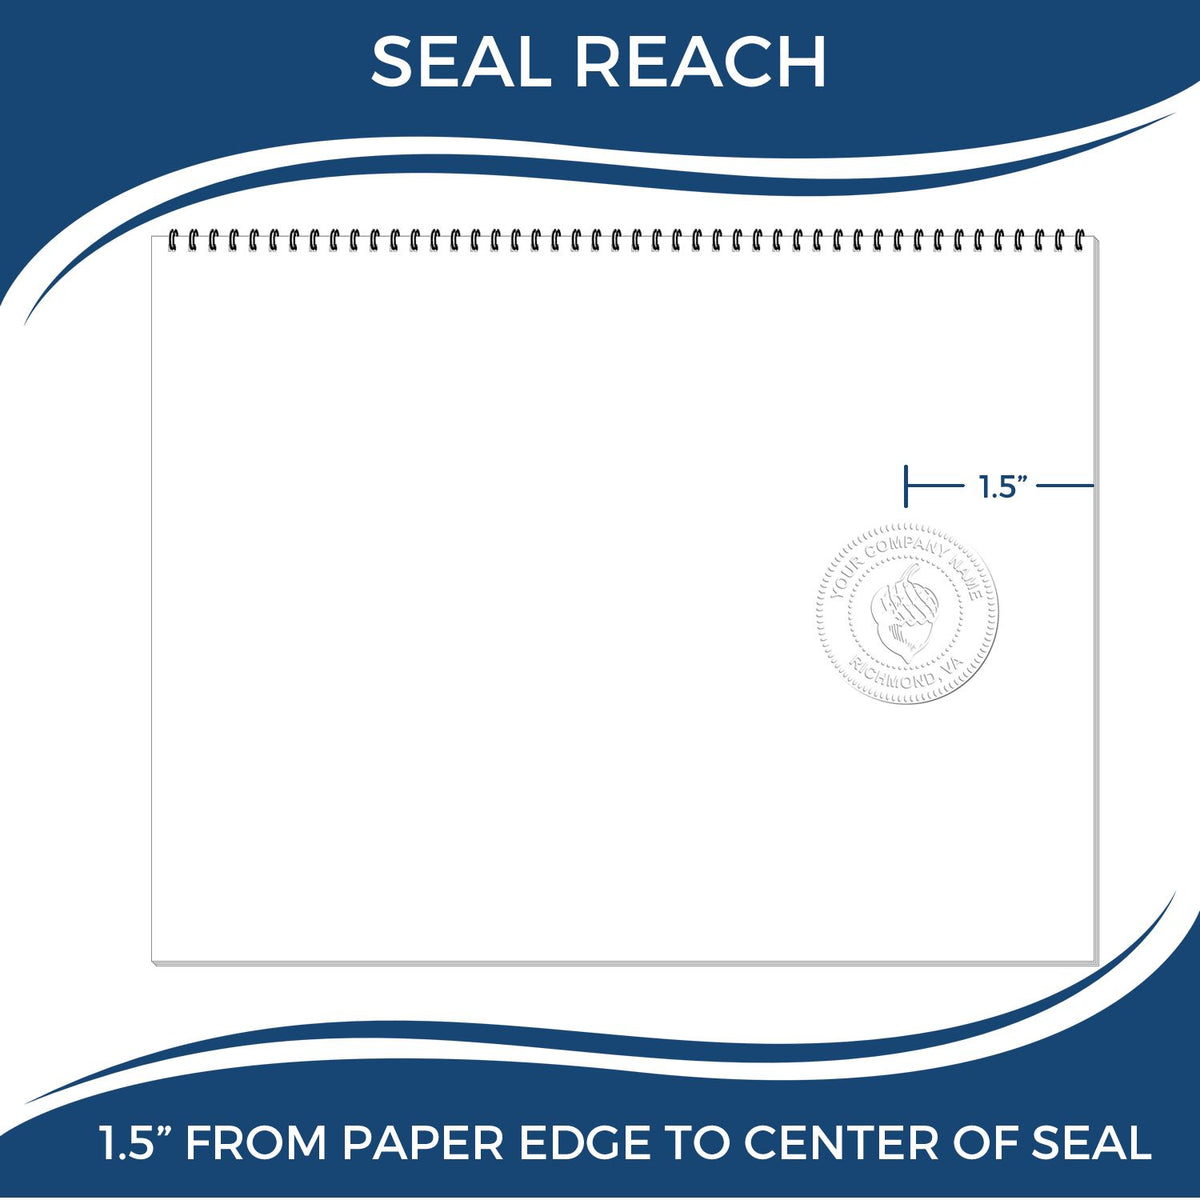 An infographic showing the seal reach which is represented by a ruler and a miniature seal image of the Gift Alabama Architect Seal